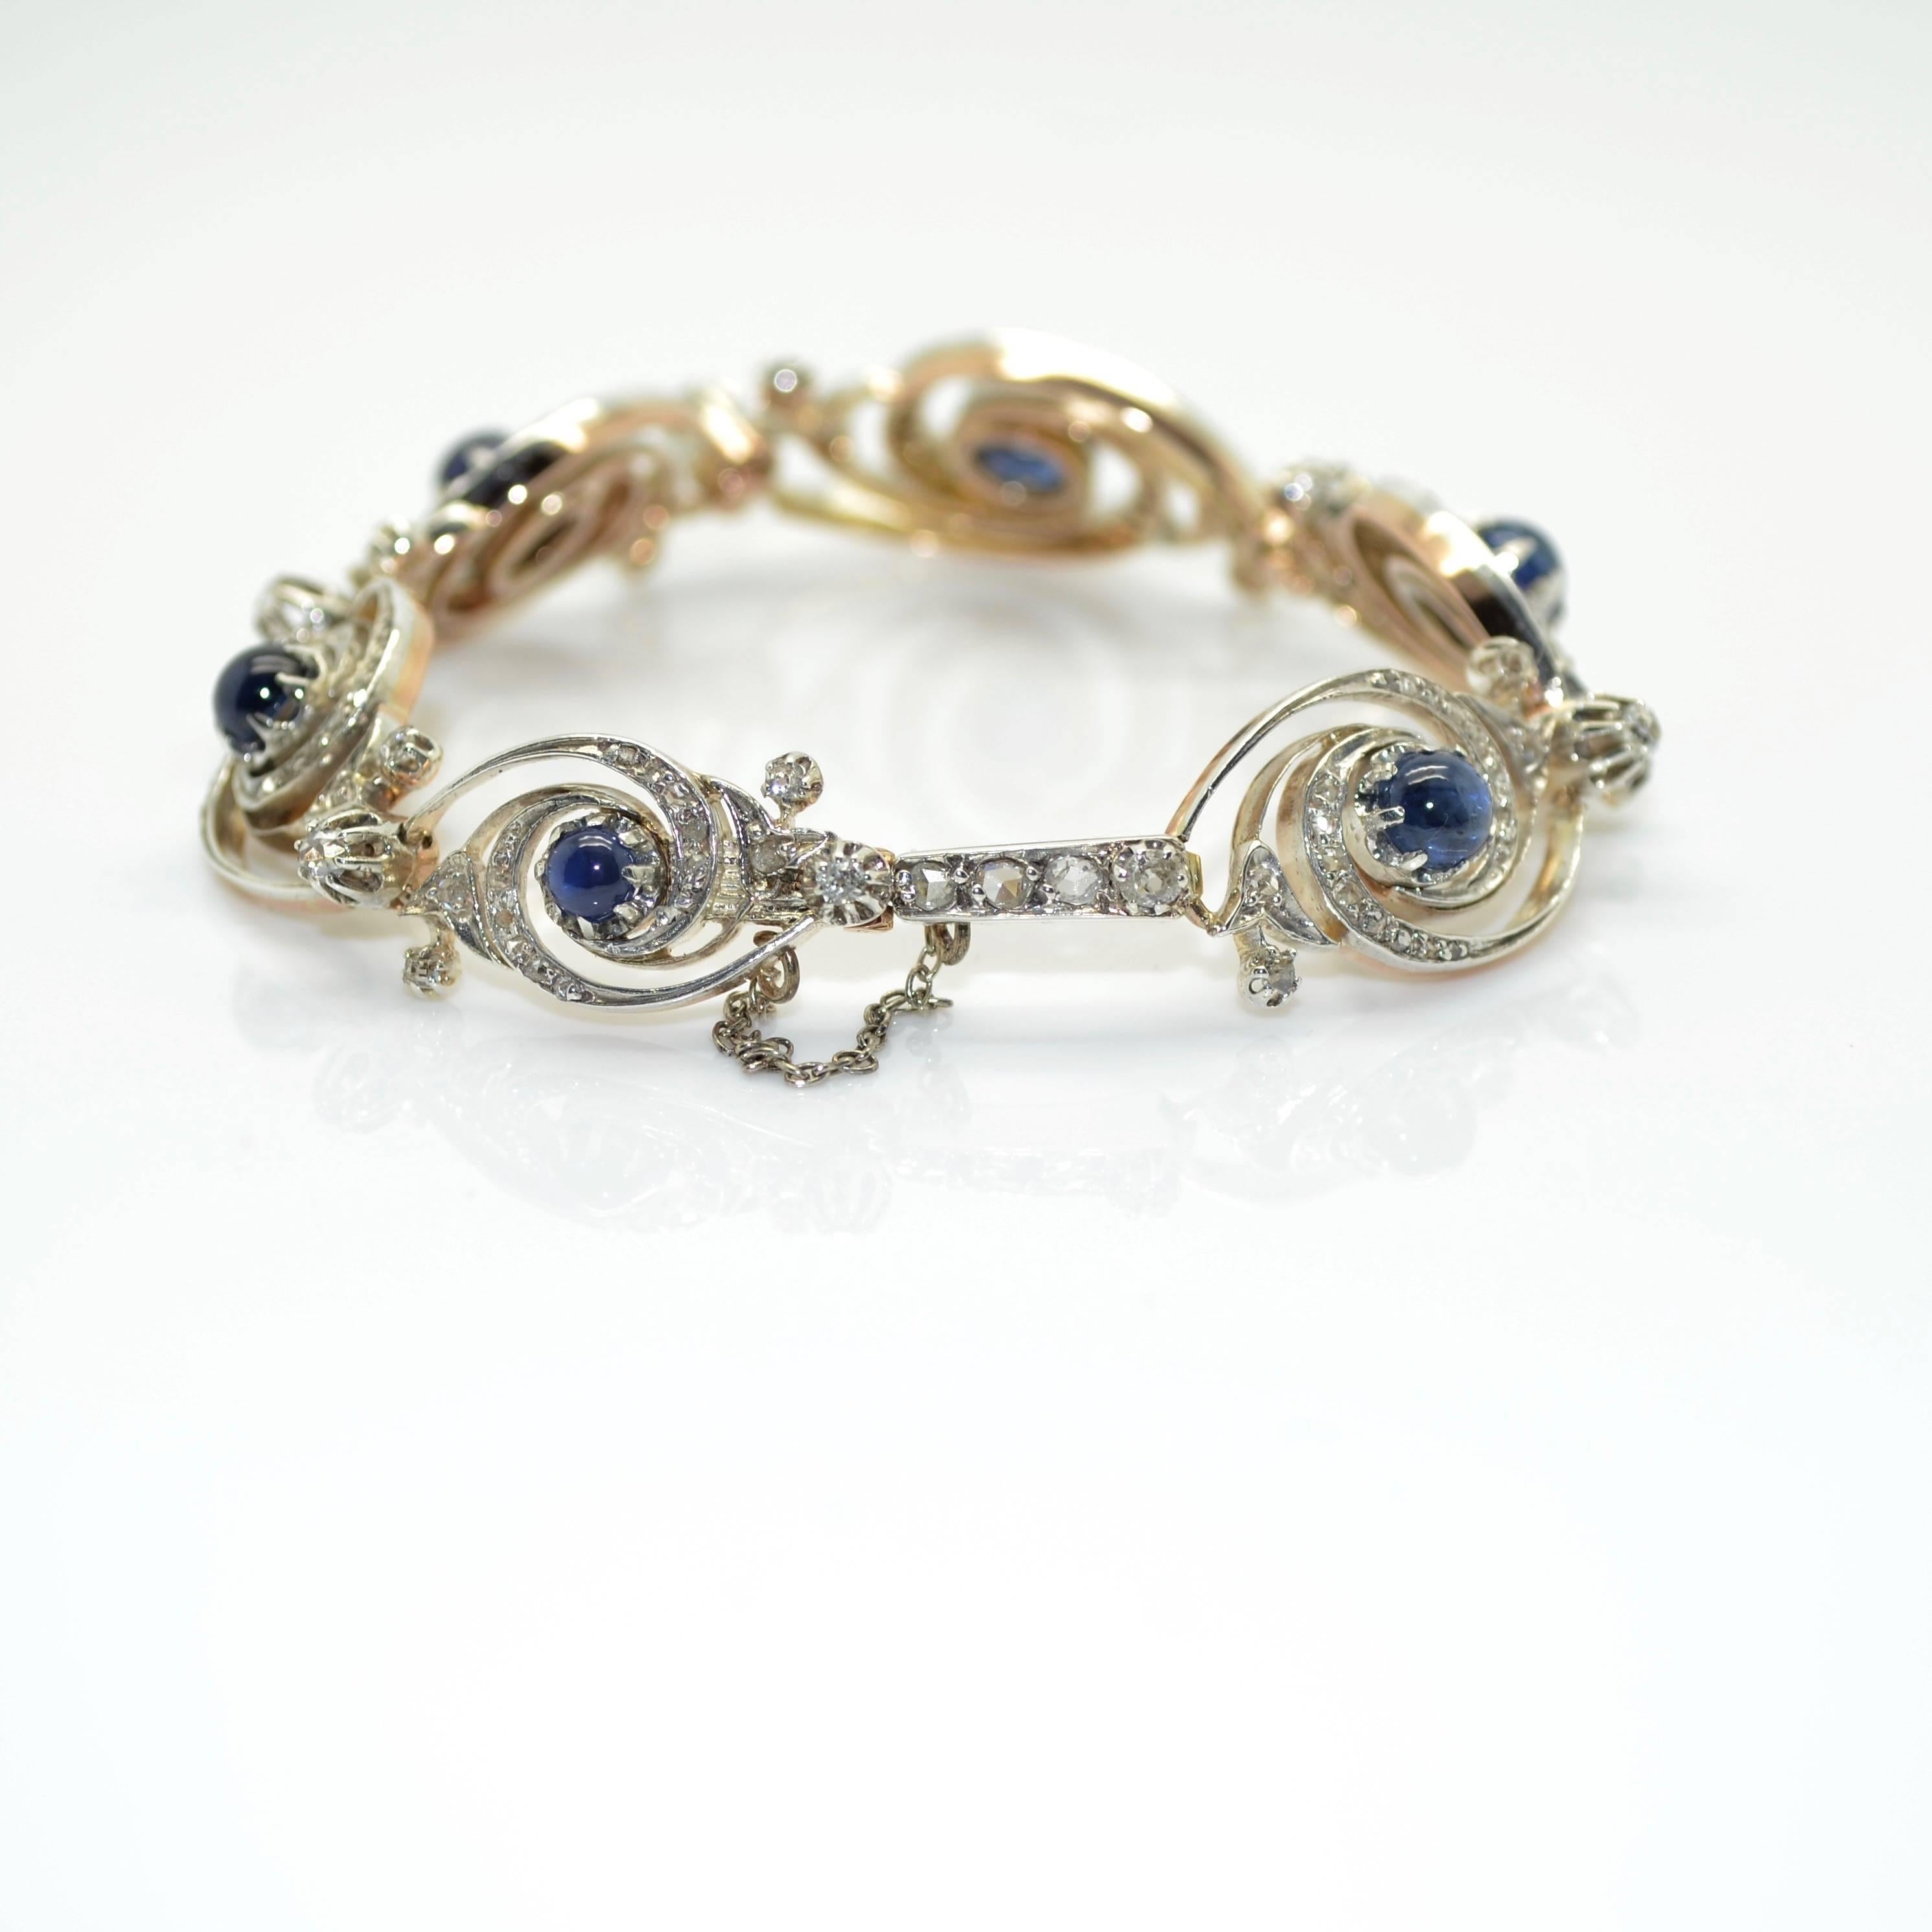 French Art-Nouveau platinum bracelet, circa 1900
The back is made of 18k pink gold.
It has been designed by Emile Olive (Maison Fonsèque et Olive).
This rare bracelet weighting 29g has French assay mark (dog’s head).
Six beautiful sapphires